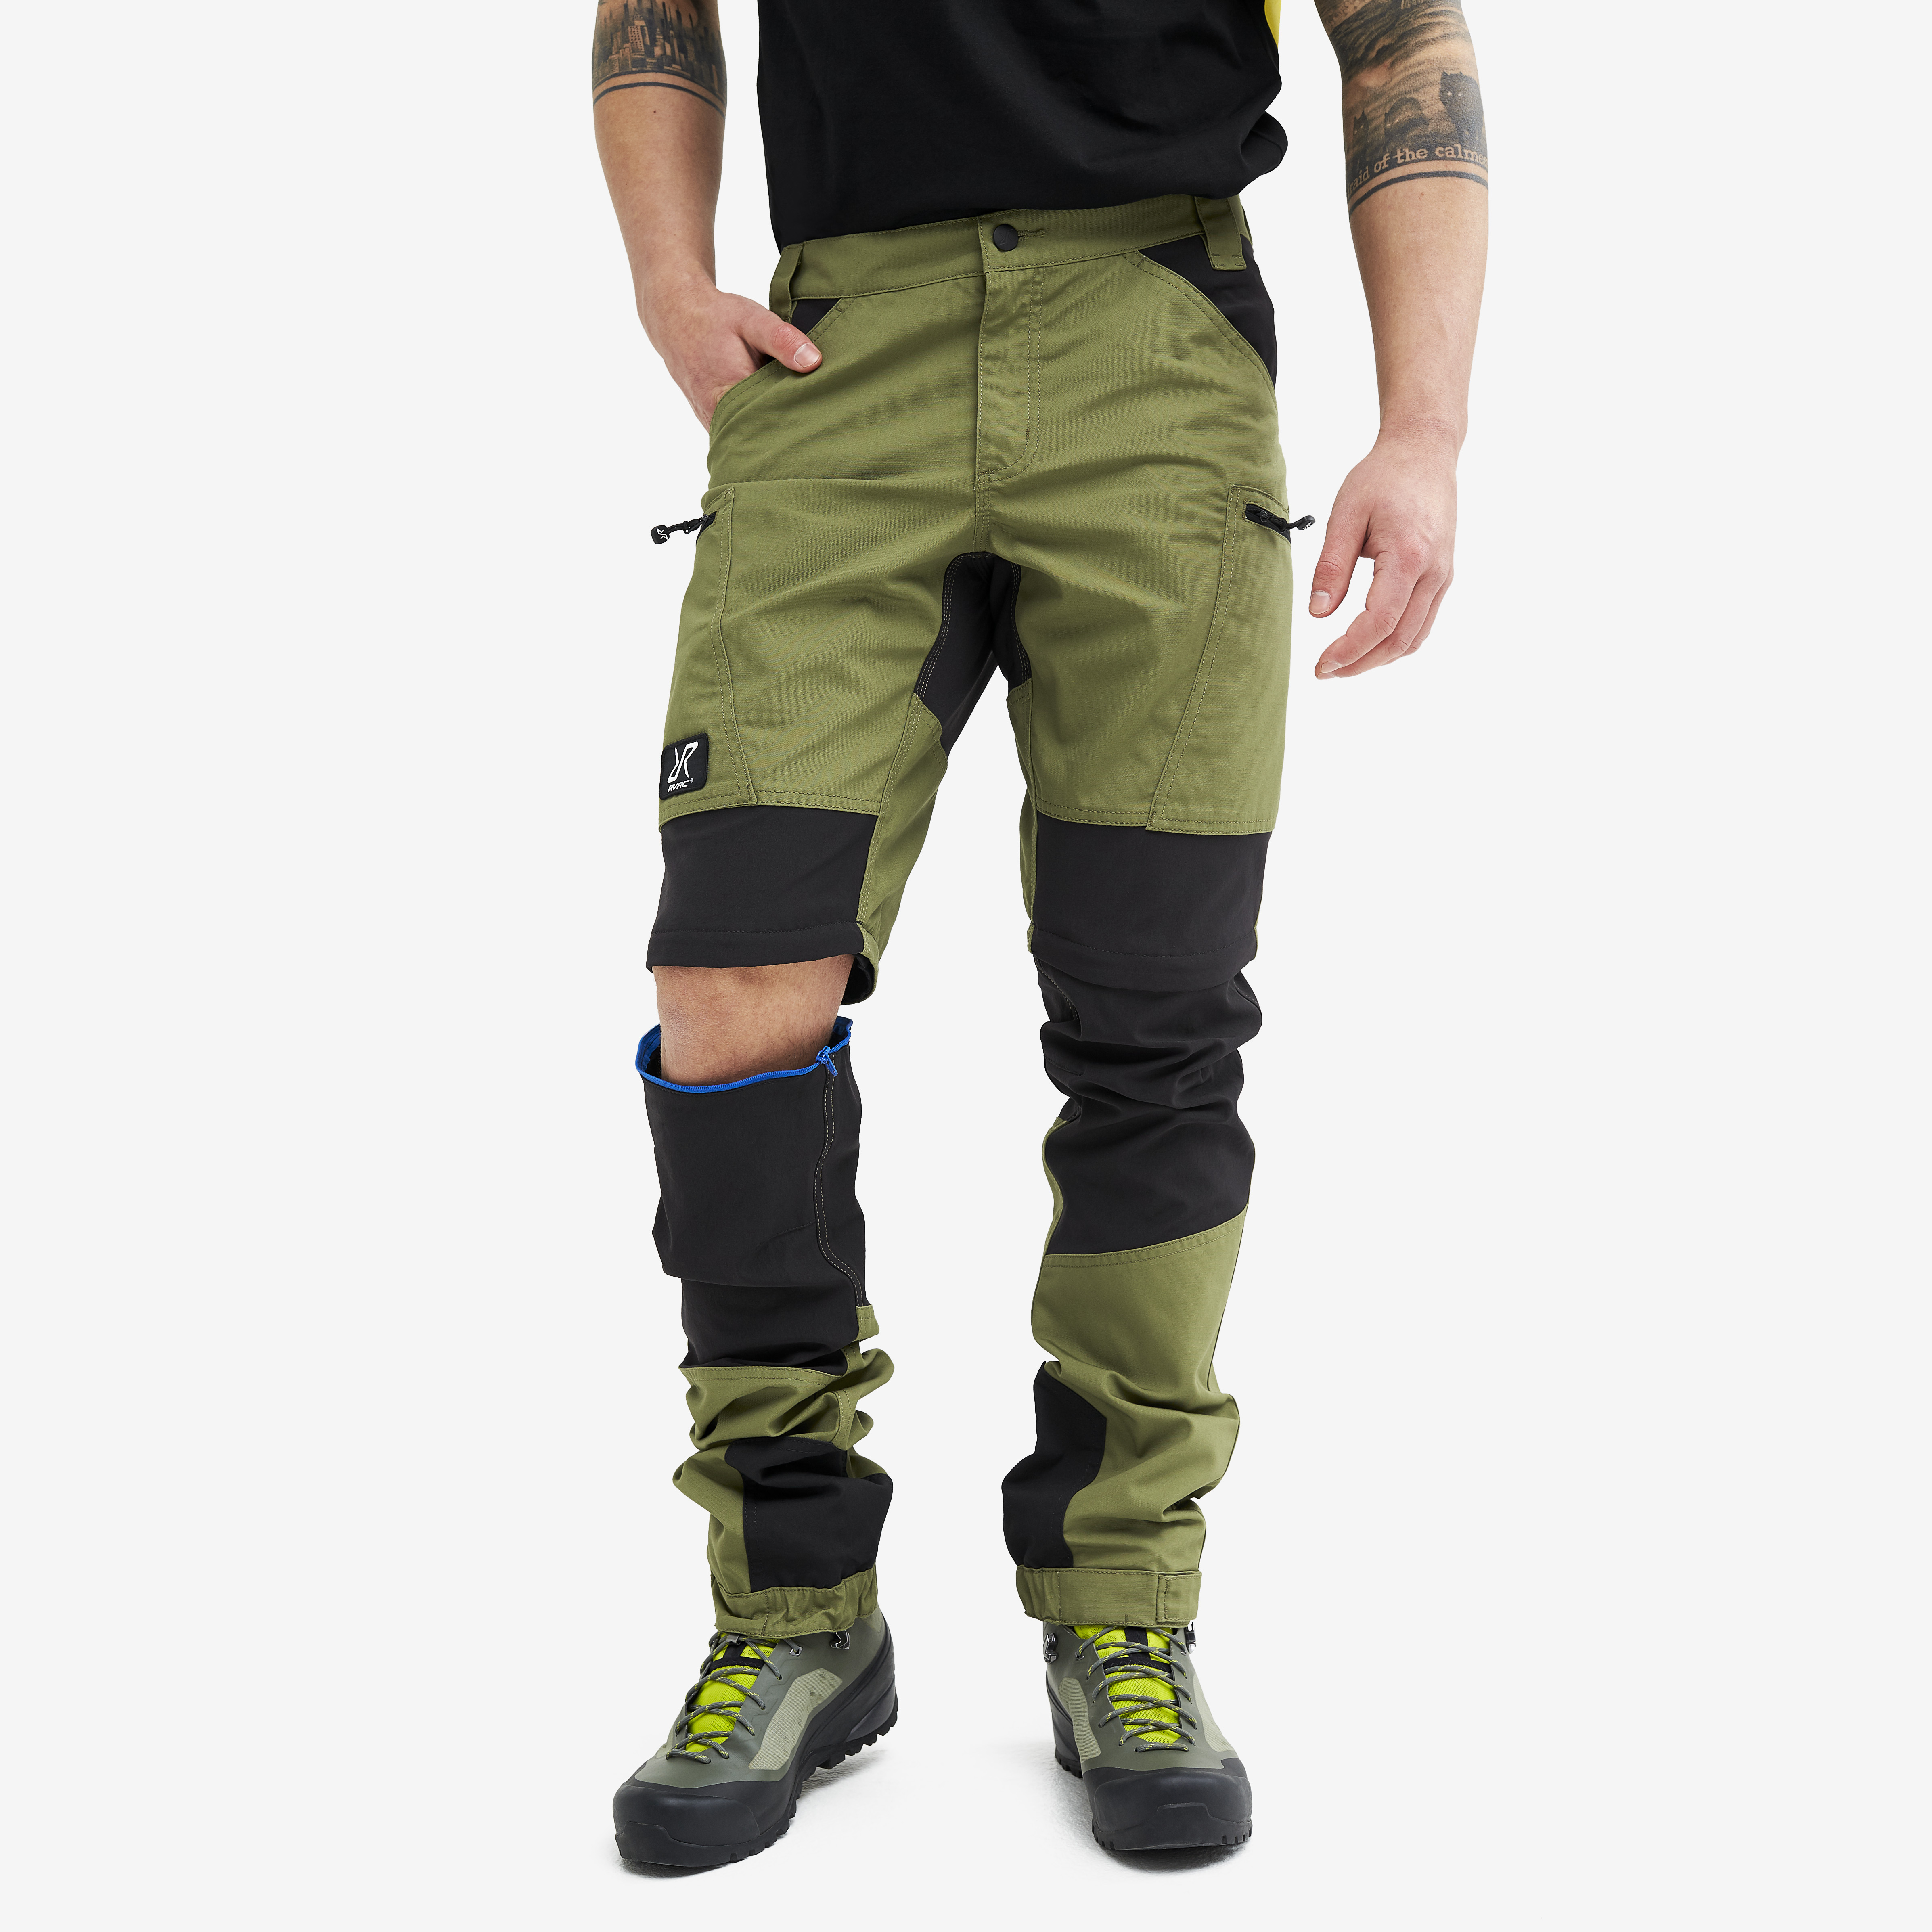 Nordwand Pro Zip-off hiking trousers for men in green